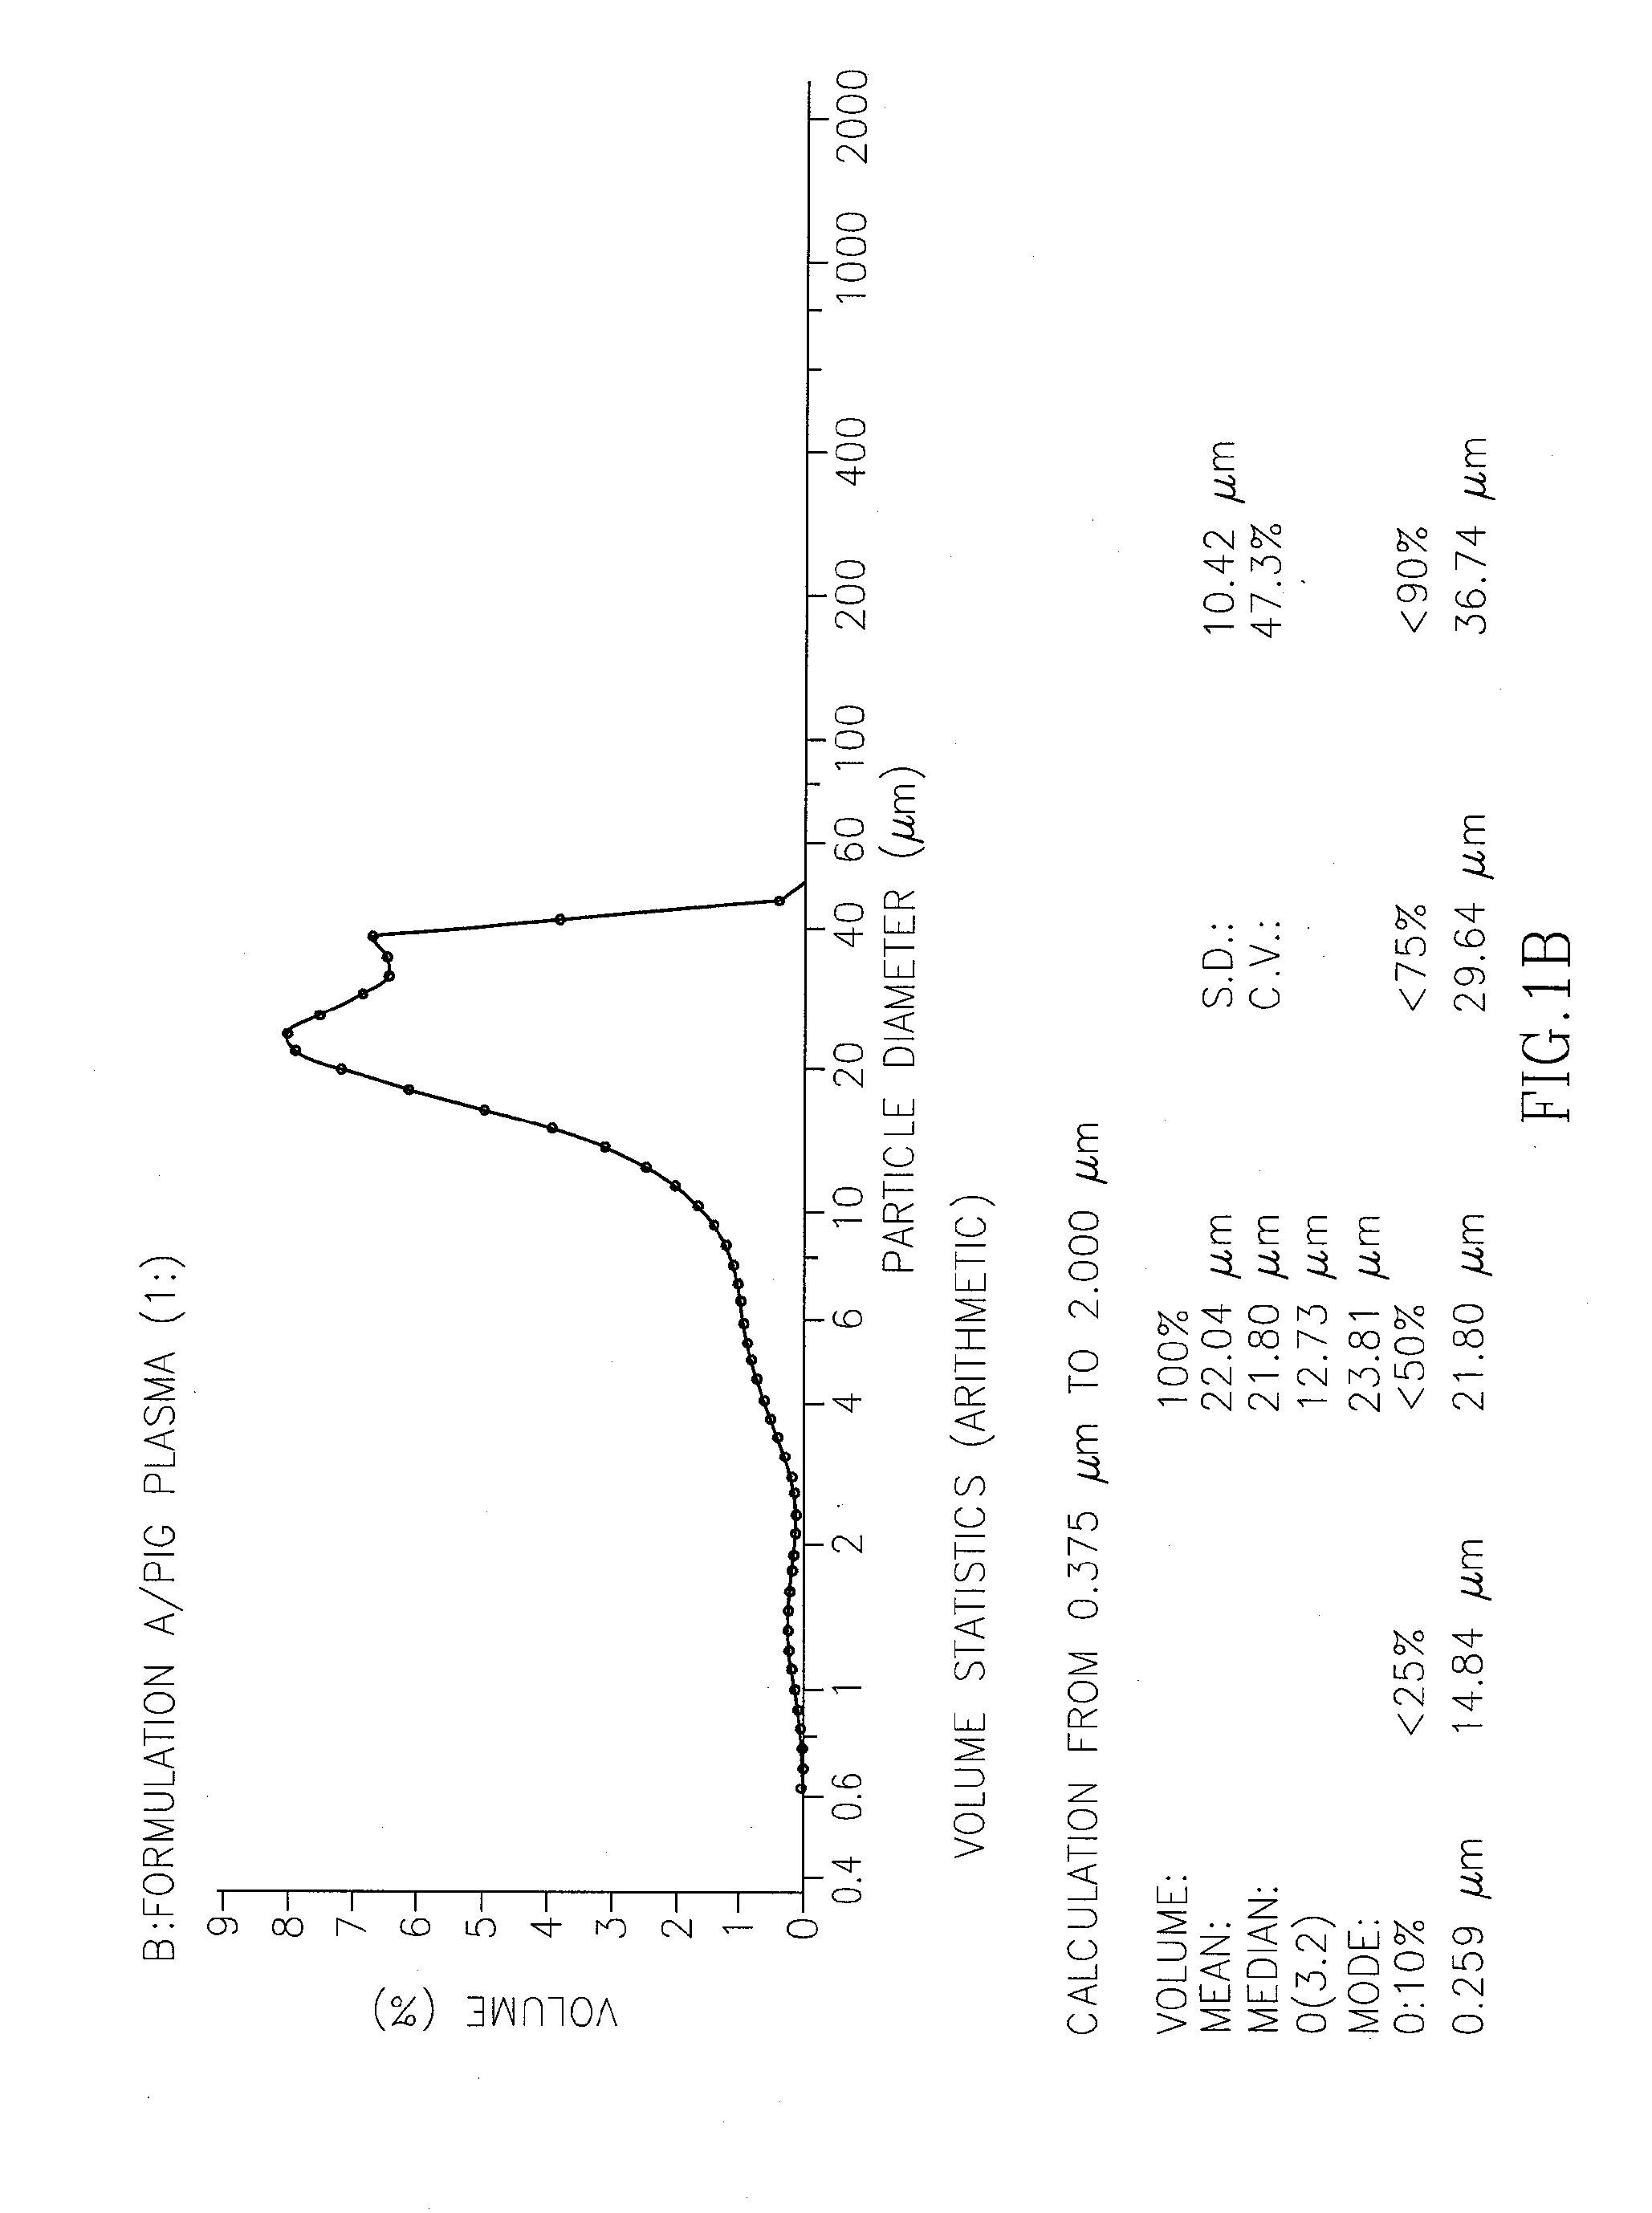 Depot Formulations of a Local Anesthetic and Methods for Preparation Thereof